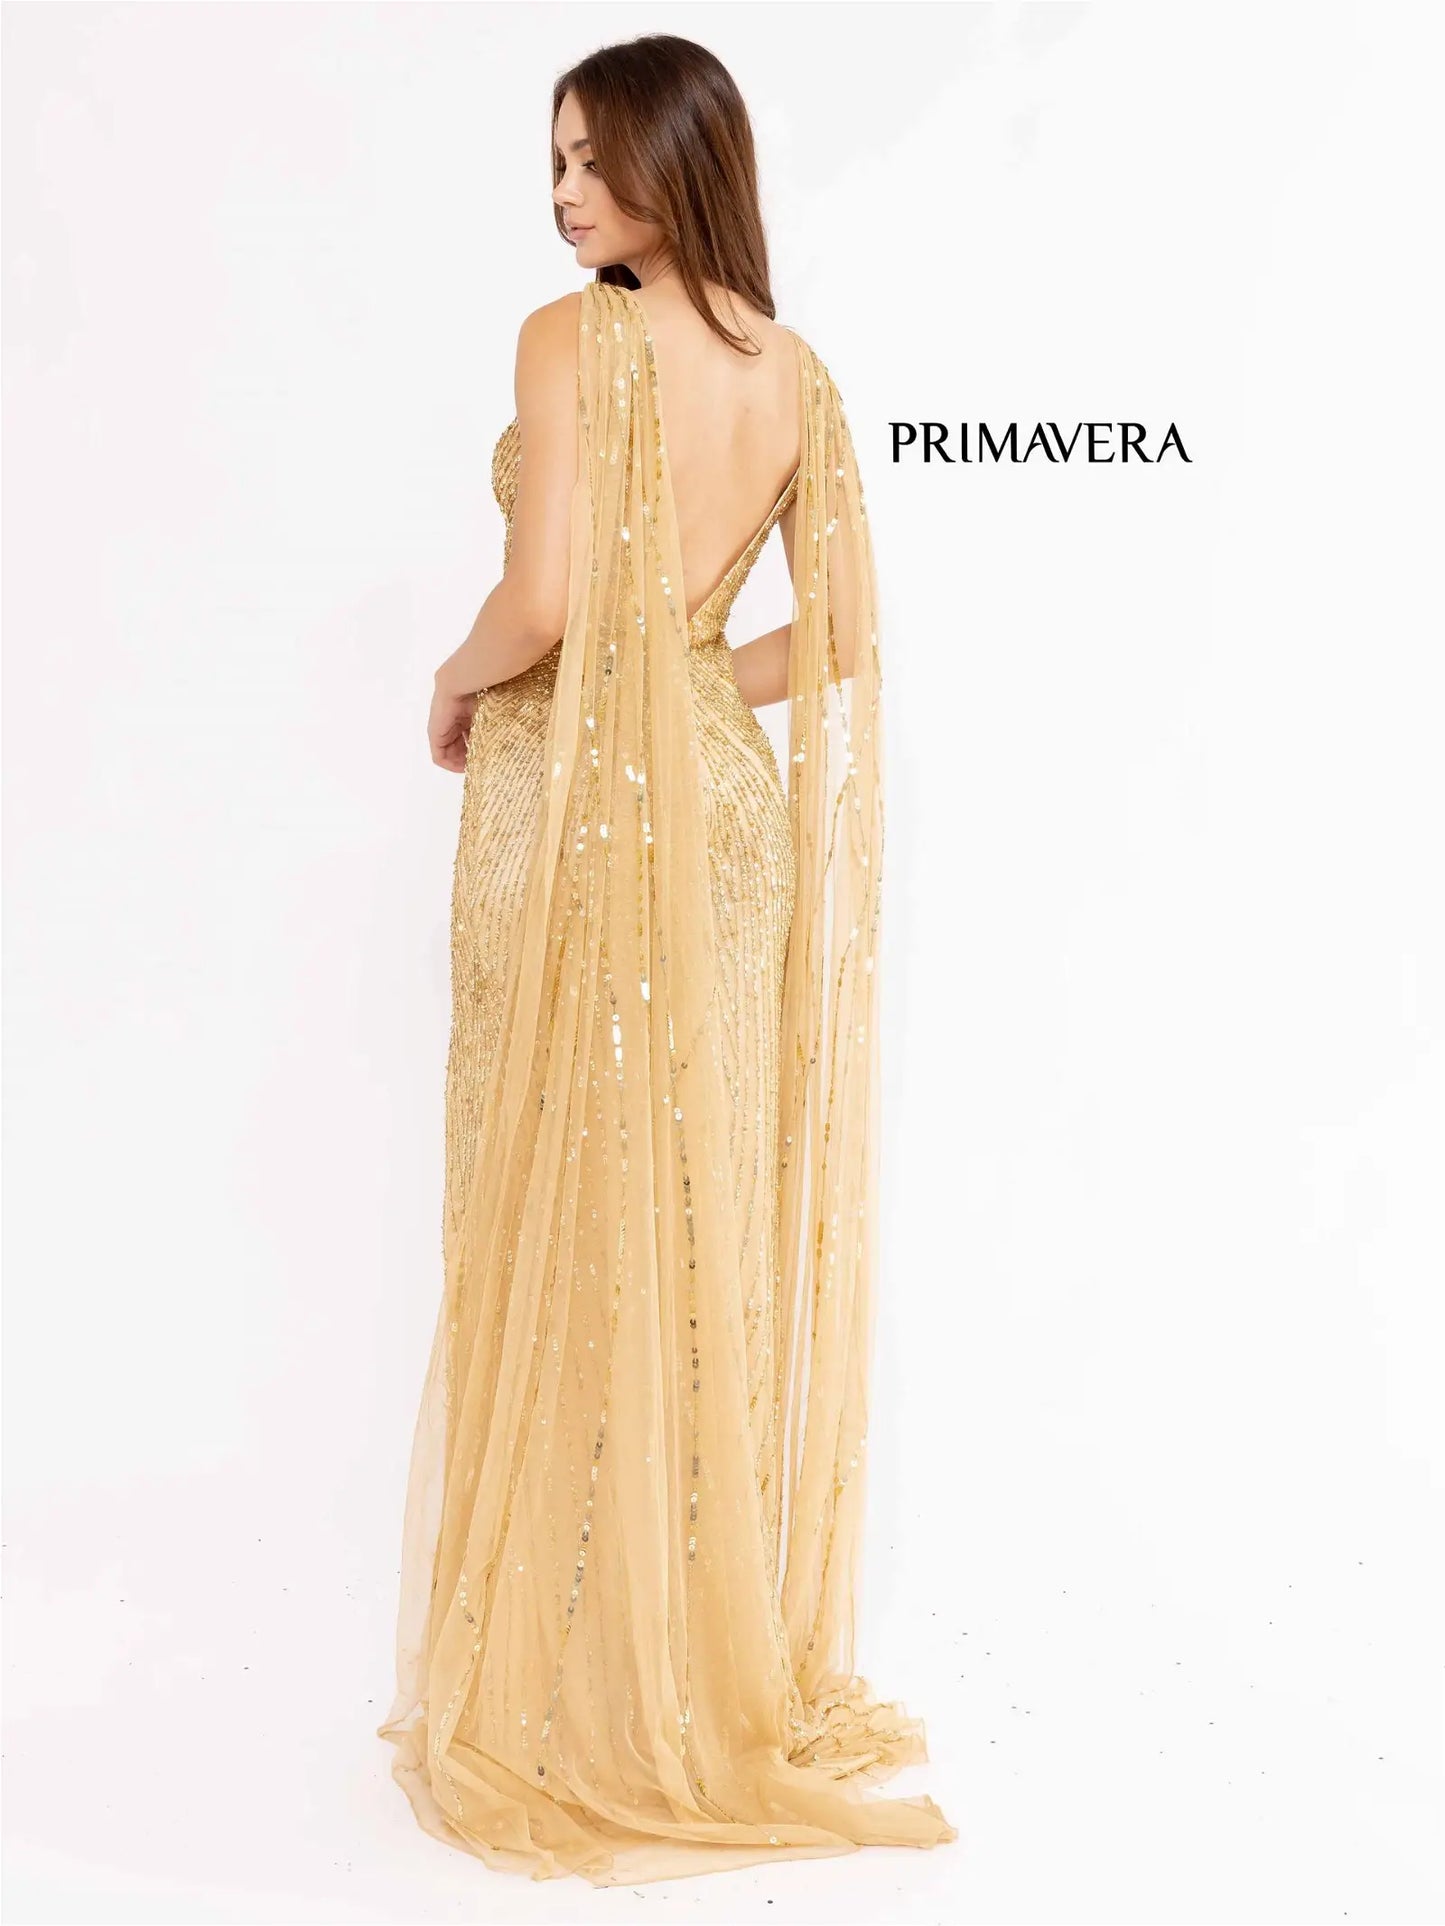 Primavera Couture 3971 Long Fitted Beaded Sequin Formal Pageant Dress Prom Gown Cape This is a sequined and beaded long evening prom dress. It has a cape off both shoulders to the floor.  It has a beautiful slit.    Size: 000-18  Color: PURPLE,SAGE GREEN,IVORY,BLACK,GOLD